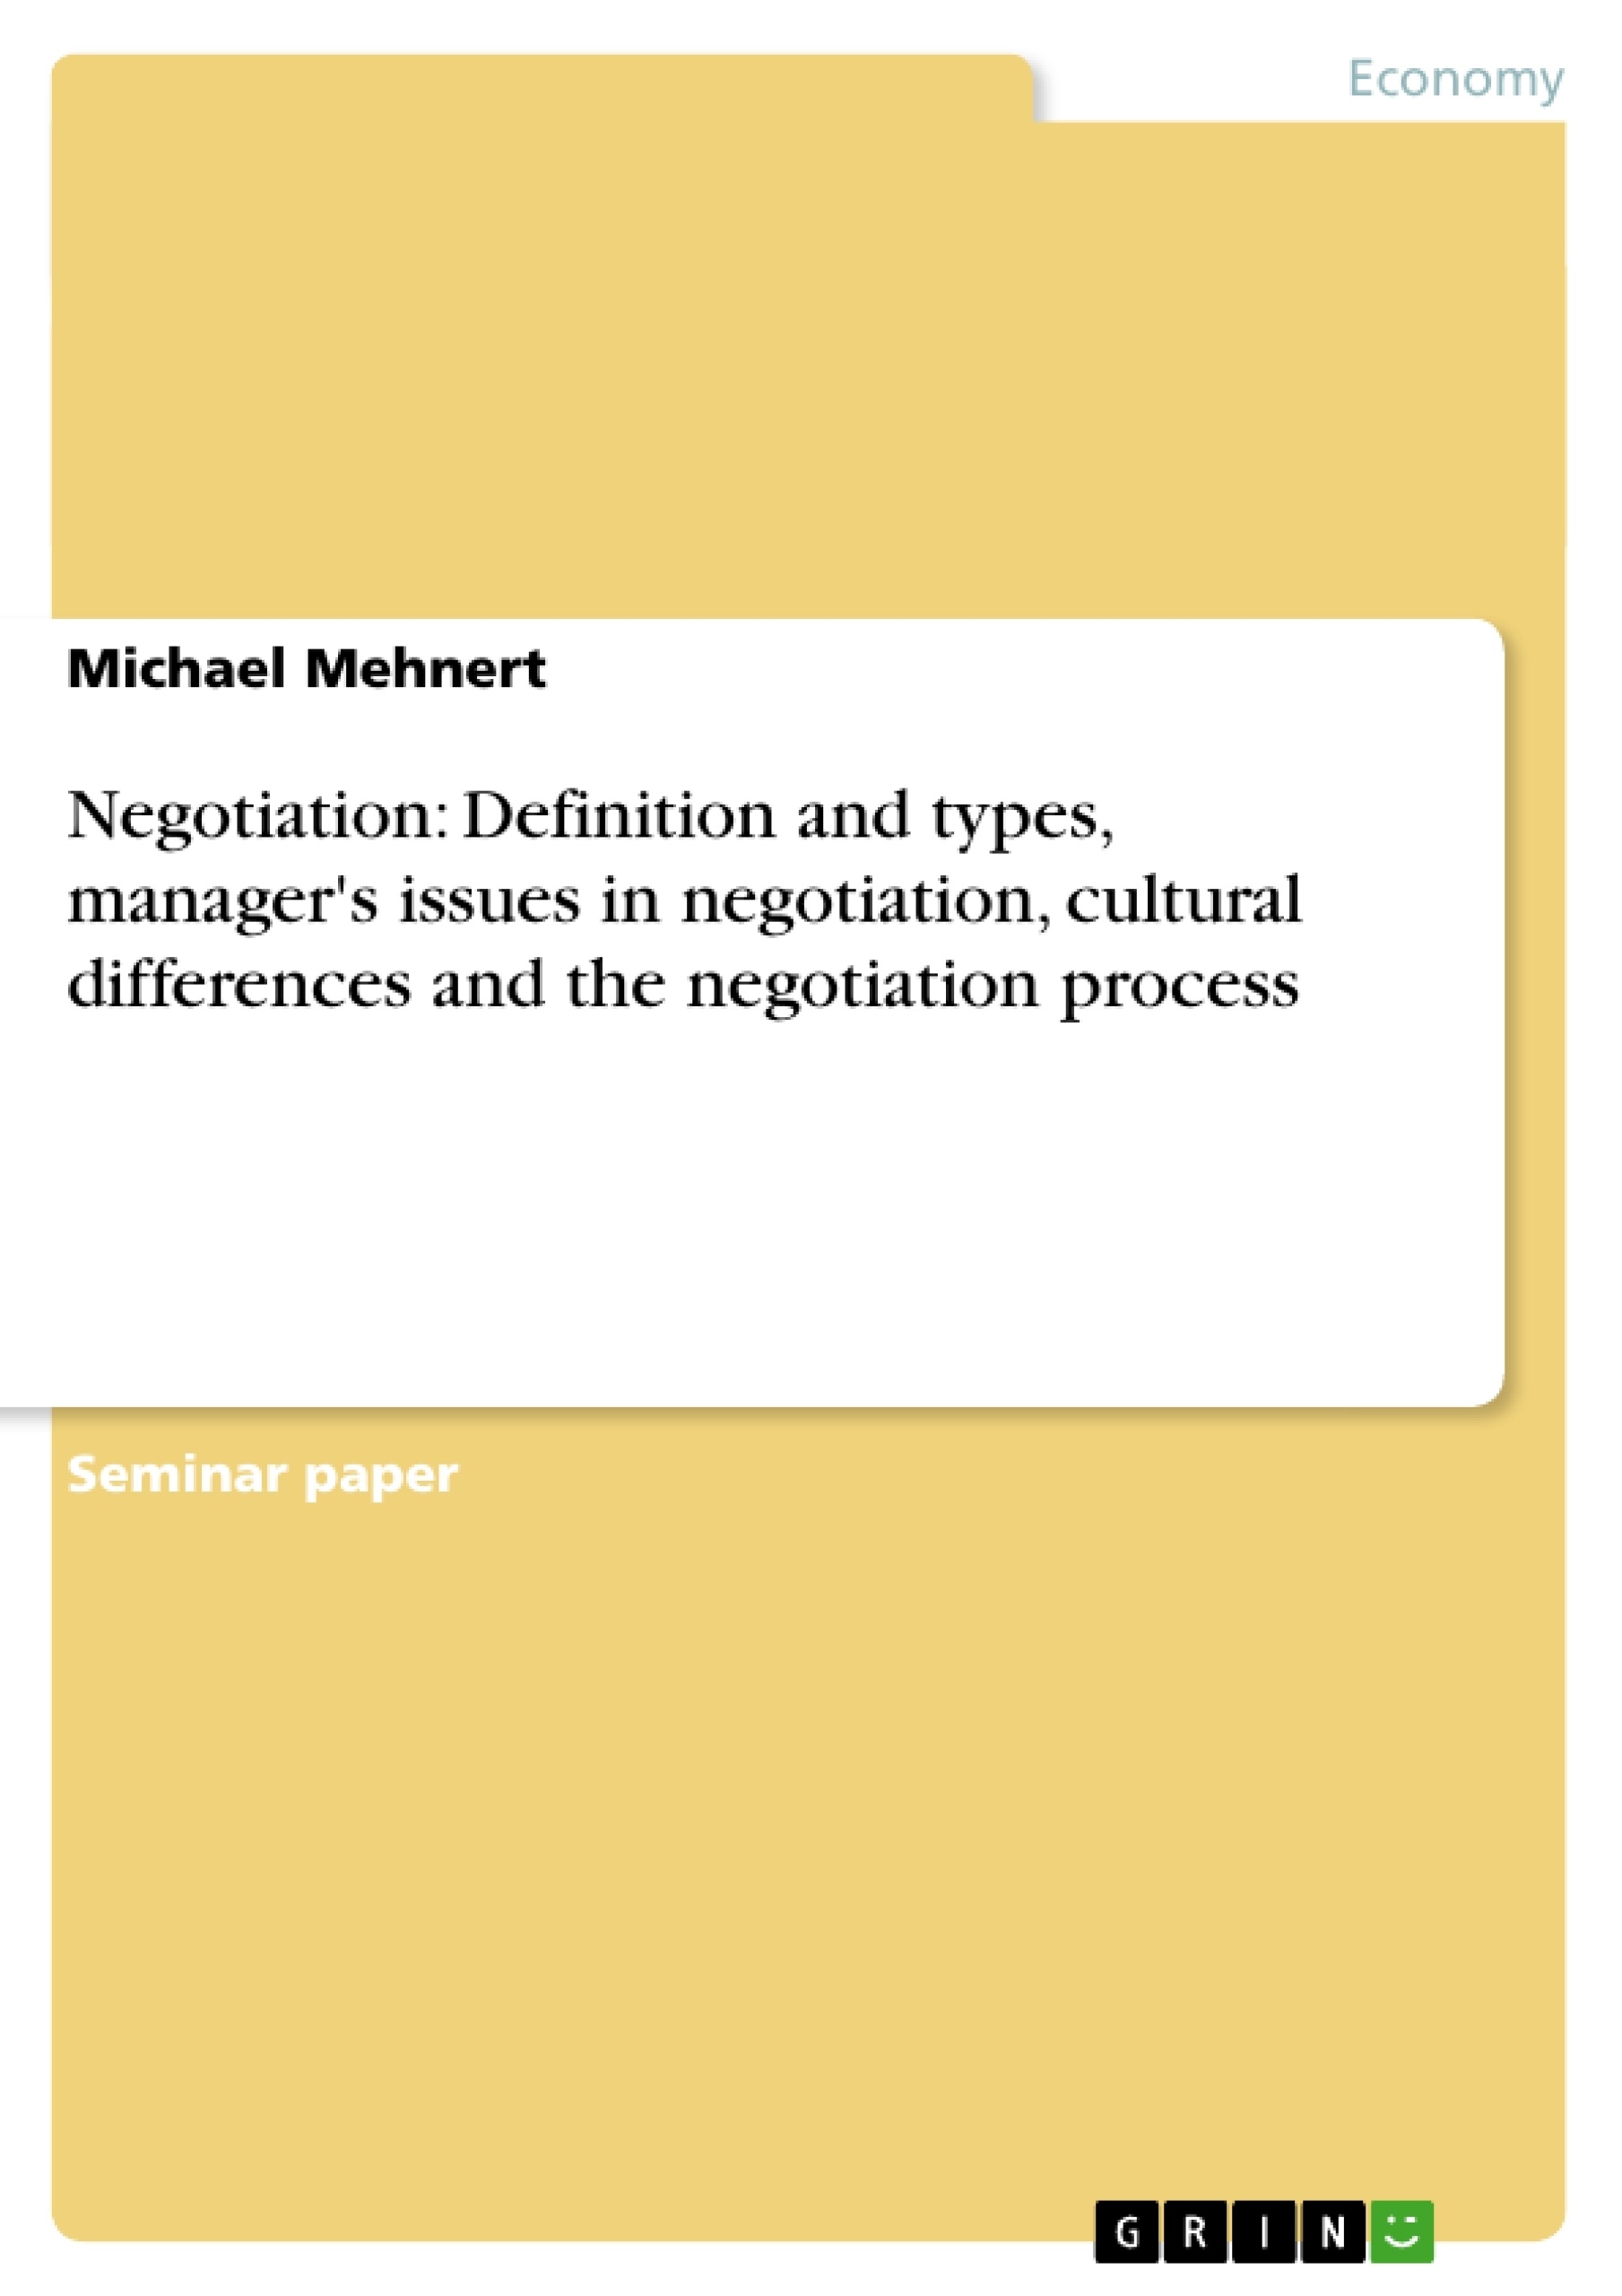 Title: Negotiation: Definition and types, manager's issues in negotiation, cultural differences and the negotiation process